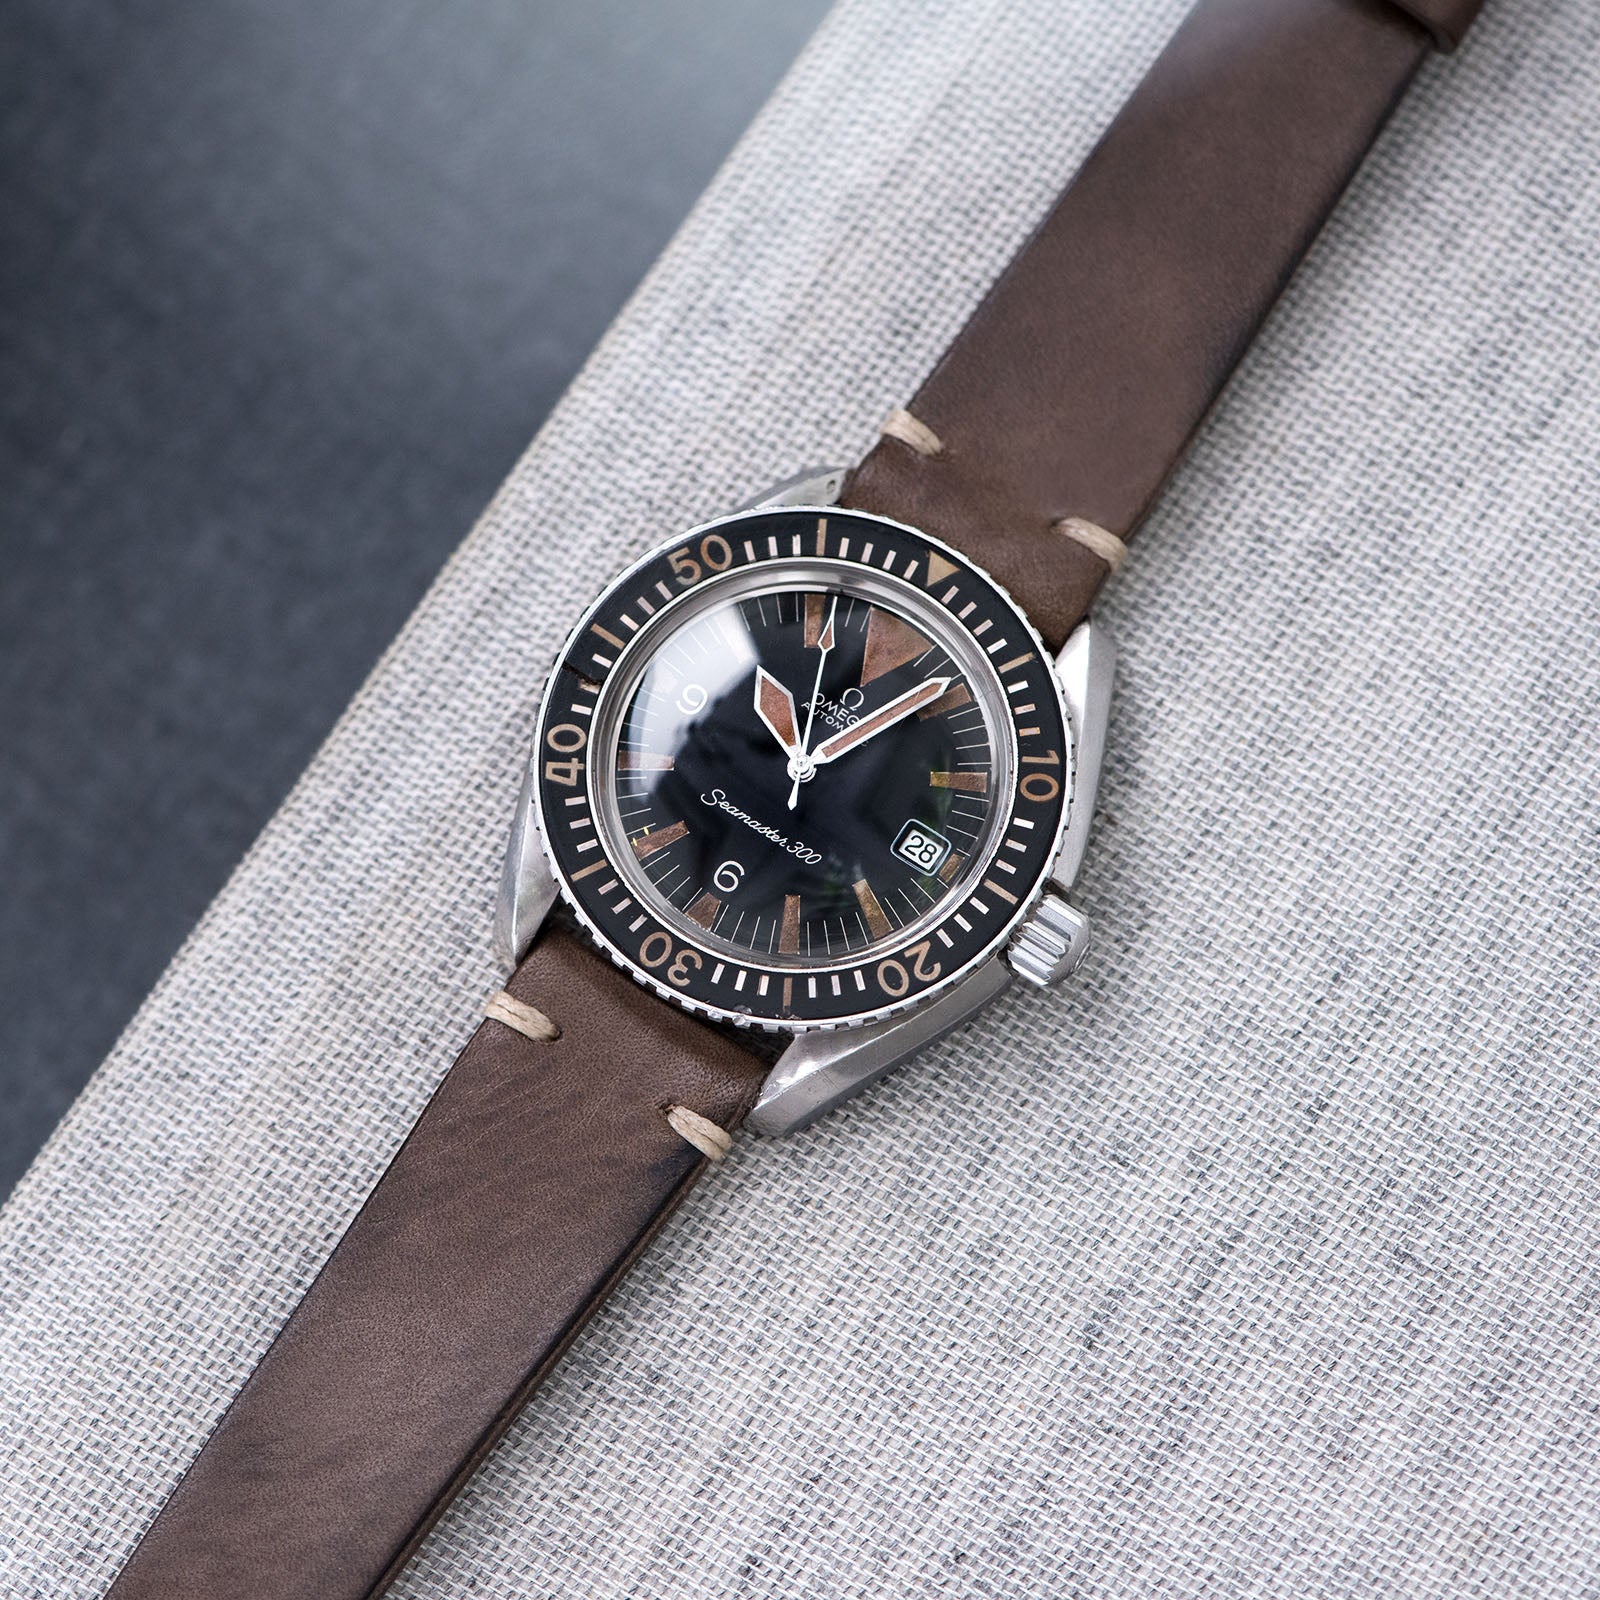 Bulang and Sons_Strap Guide_The omega SM 300 Seamaster_Smokeyjack Grey Leather Watch Strap